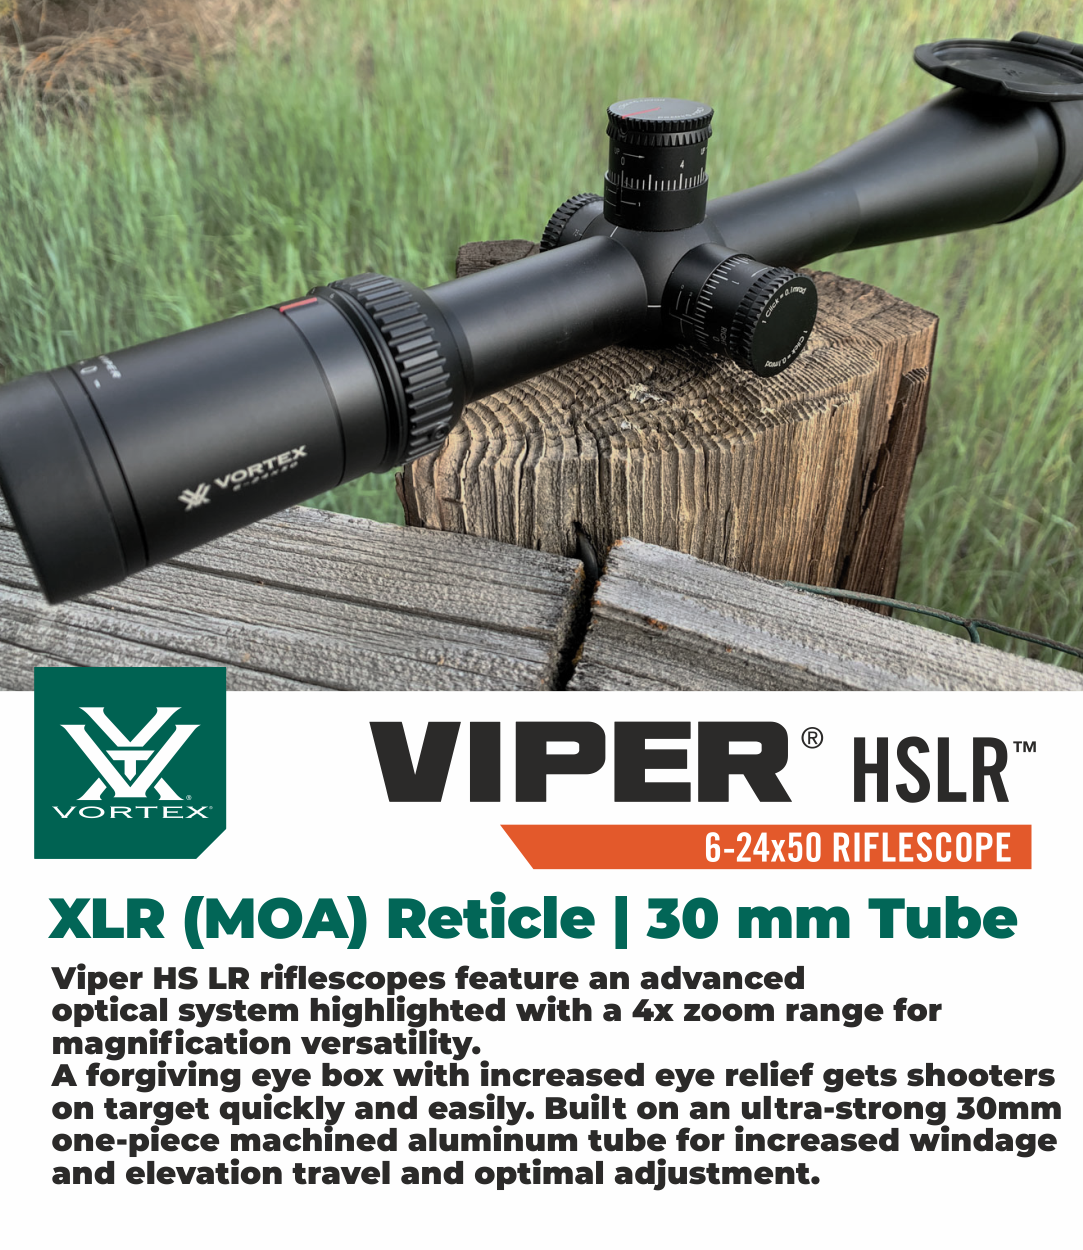 Vortex Optics Viper HSLR 6-24X50 XLR (MOA) FFP, 30 mm Tube with Pro 30mm High Rings (1.18in) and Free Hat Bundle - image 3 of 7